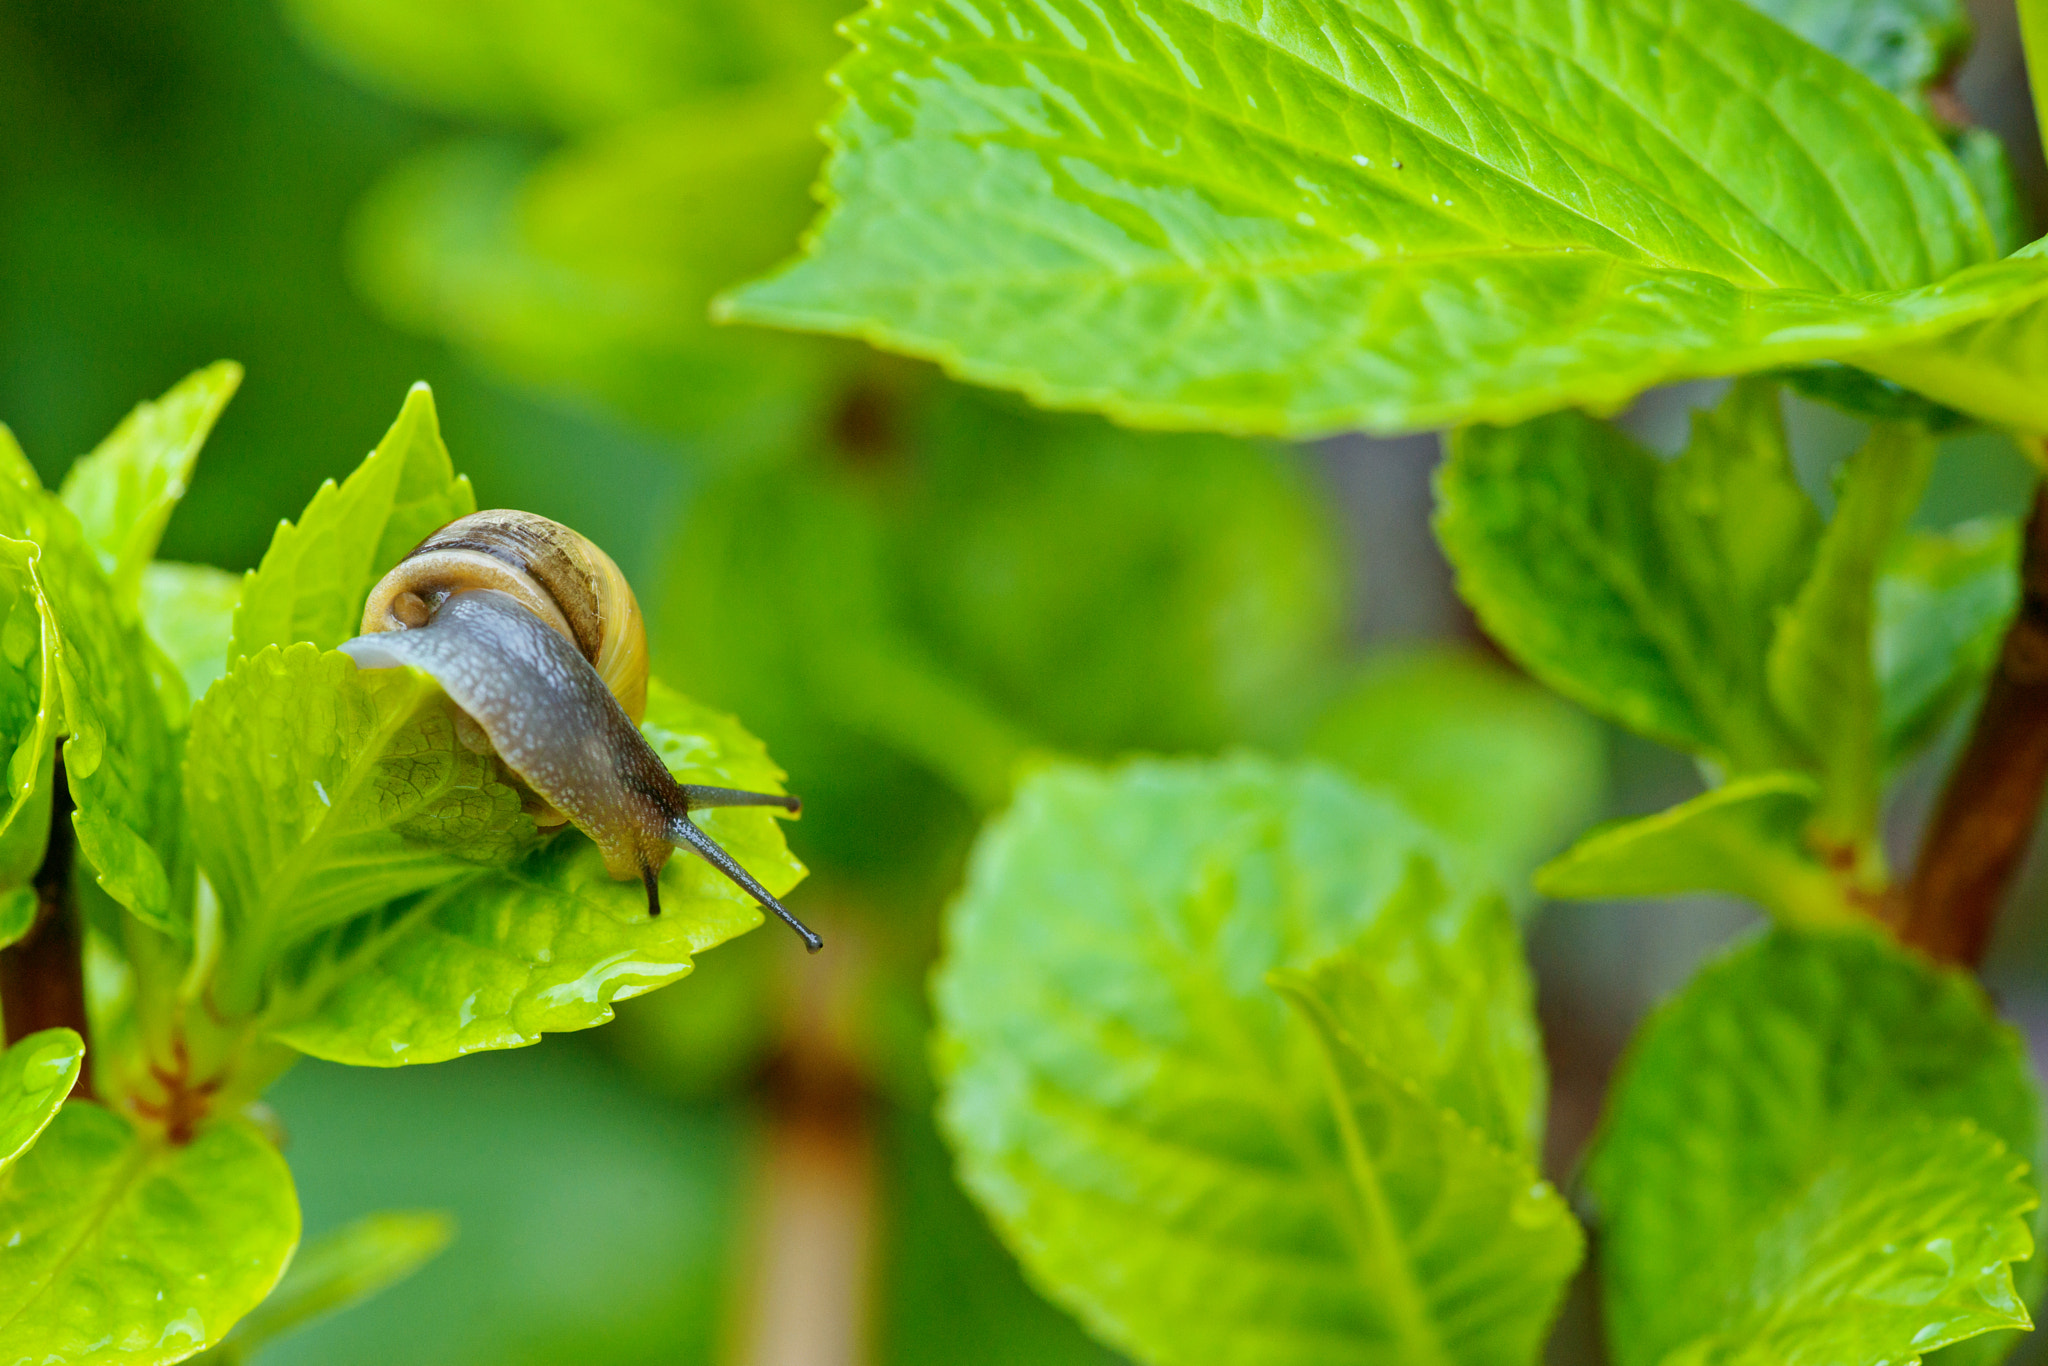 Sony Alpha DSLR-A900 sample photo. Mollusk in a garden with green plants photography